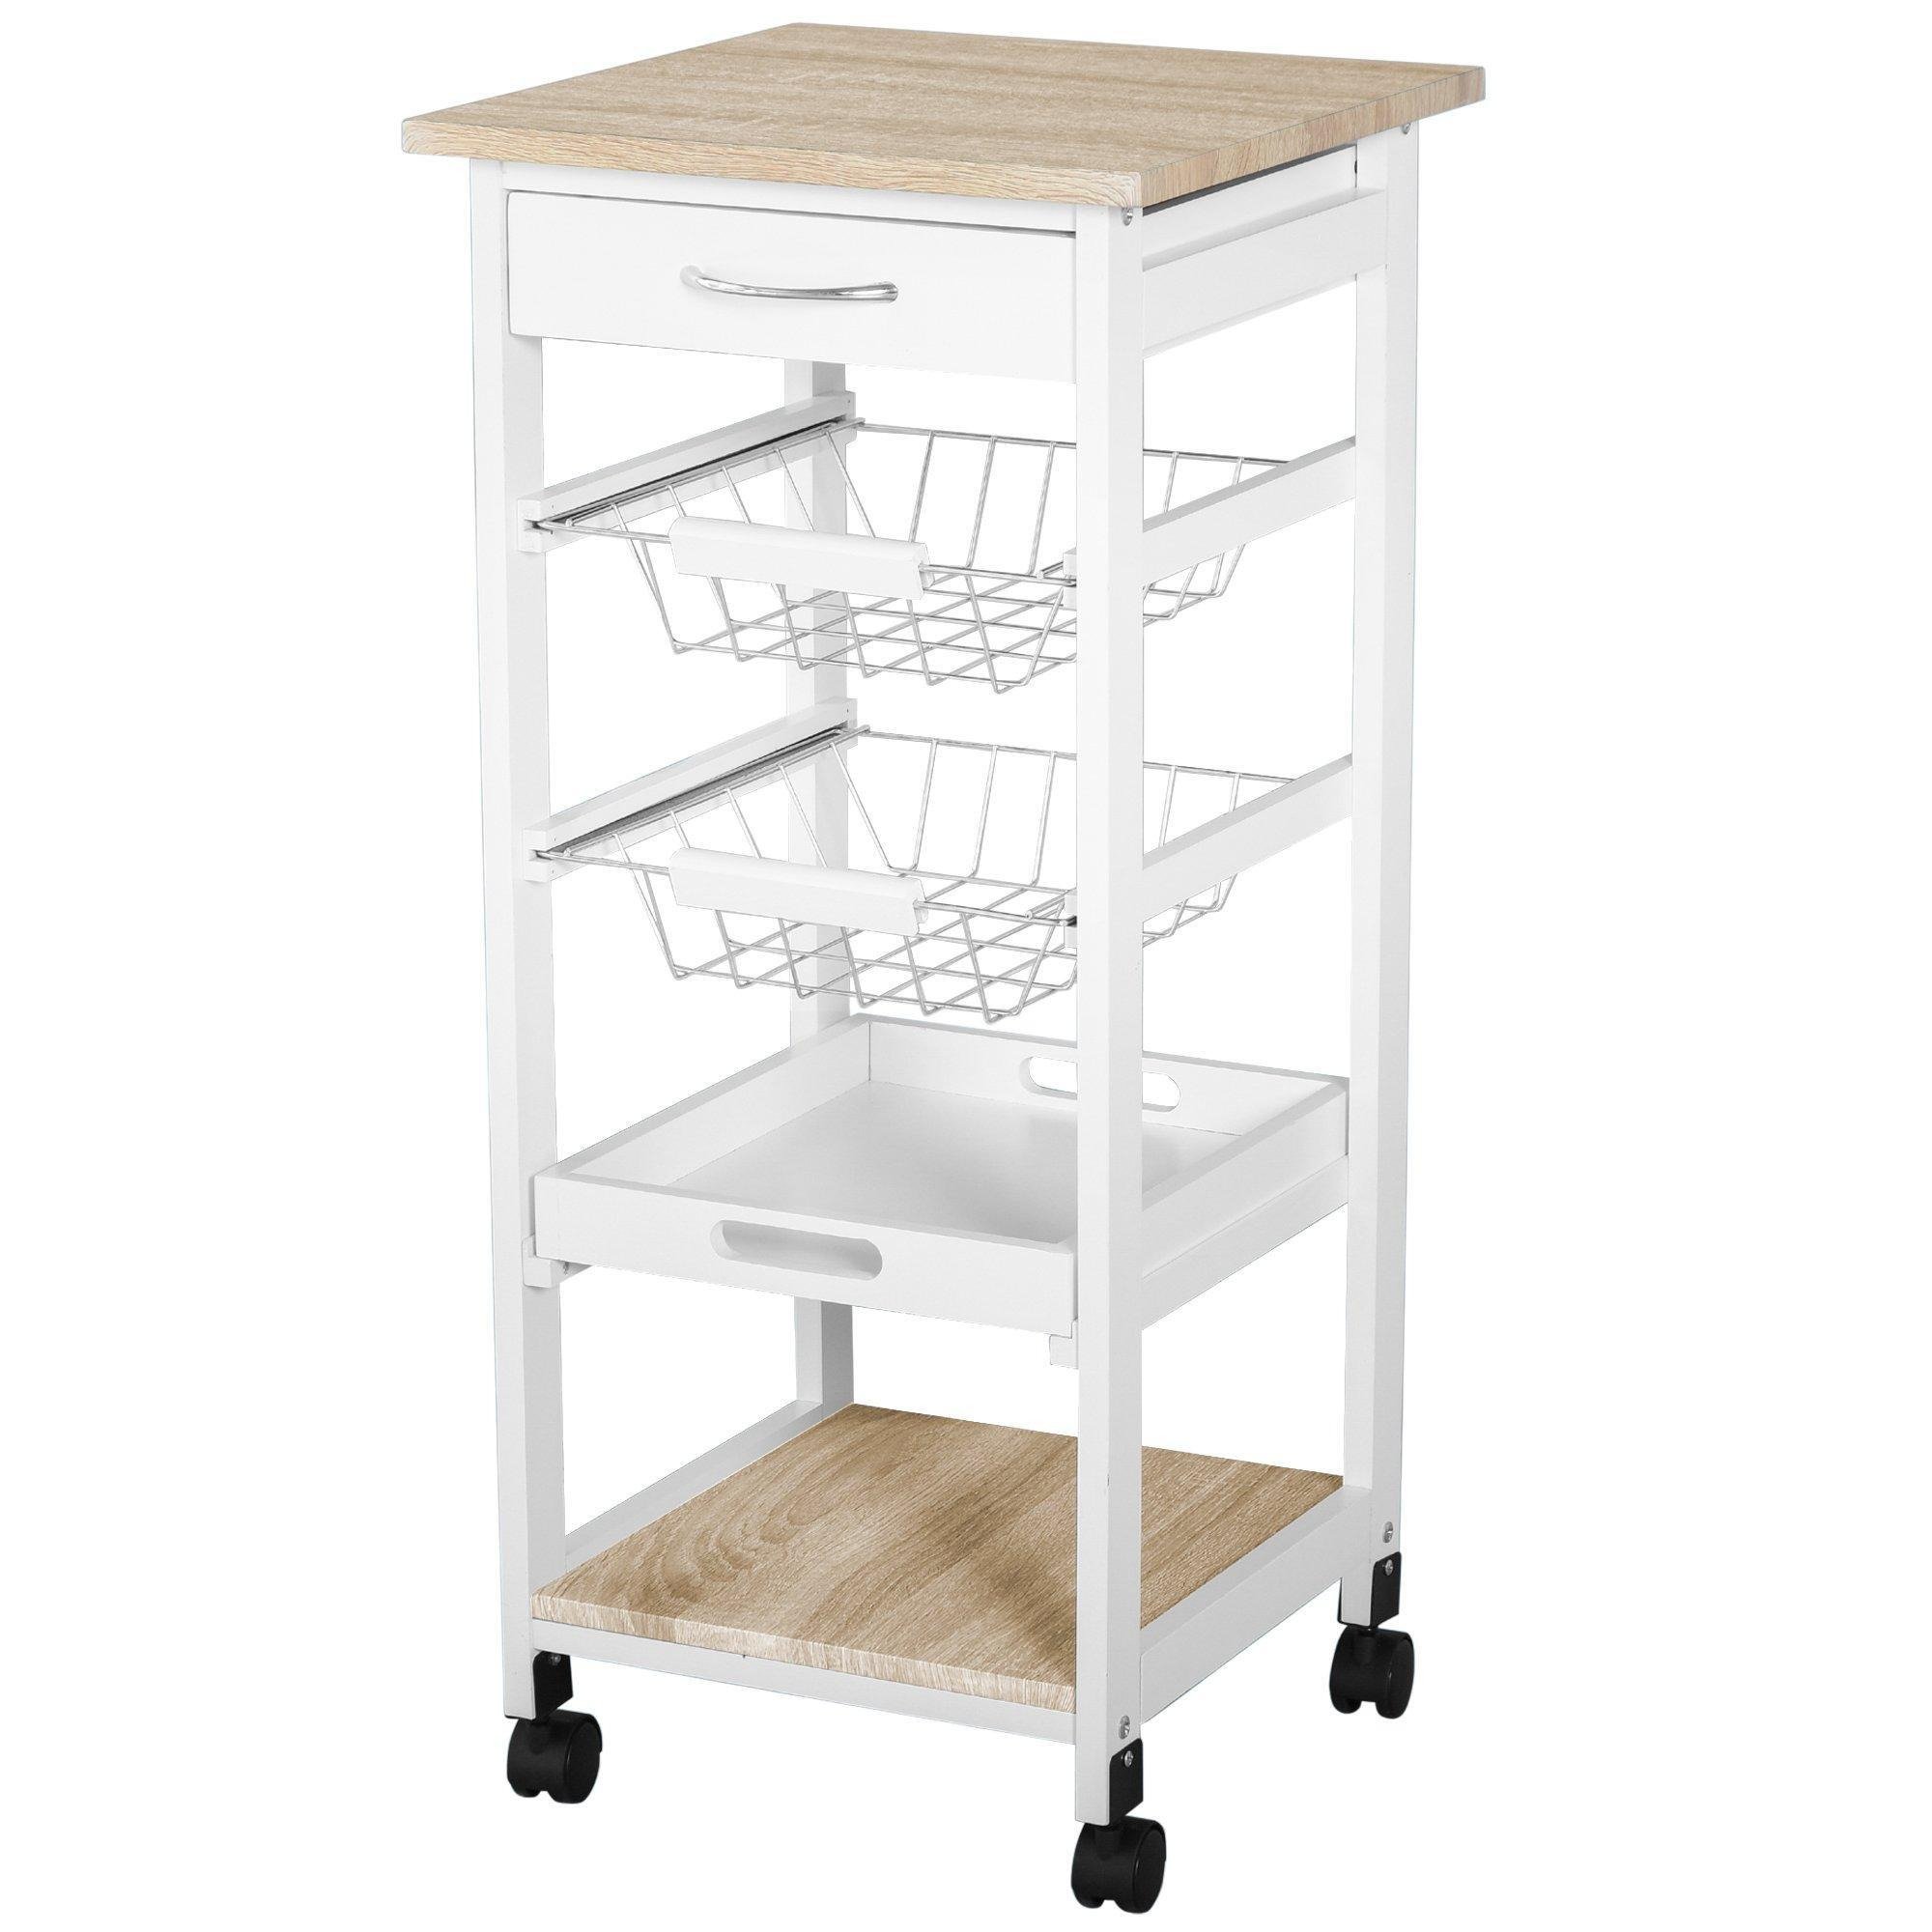 Mobile Rolling Kitchen Island Trolley for Home   Metal Baskets - image 1